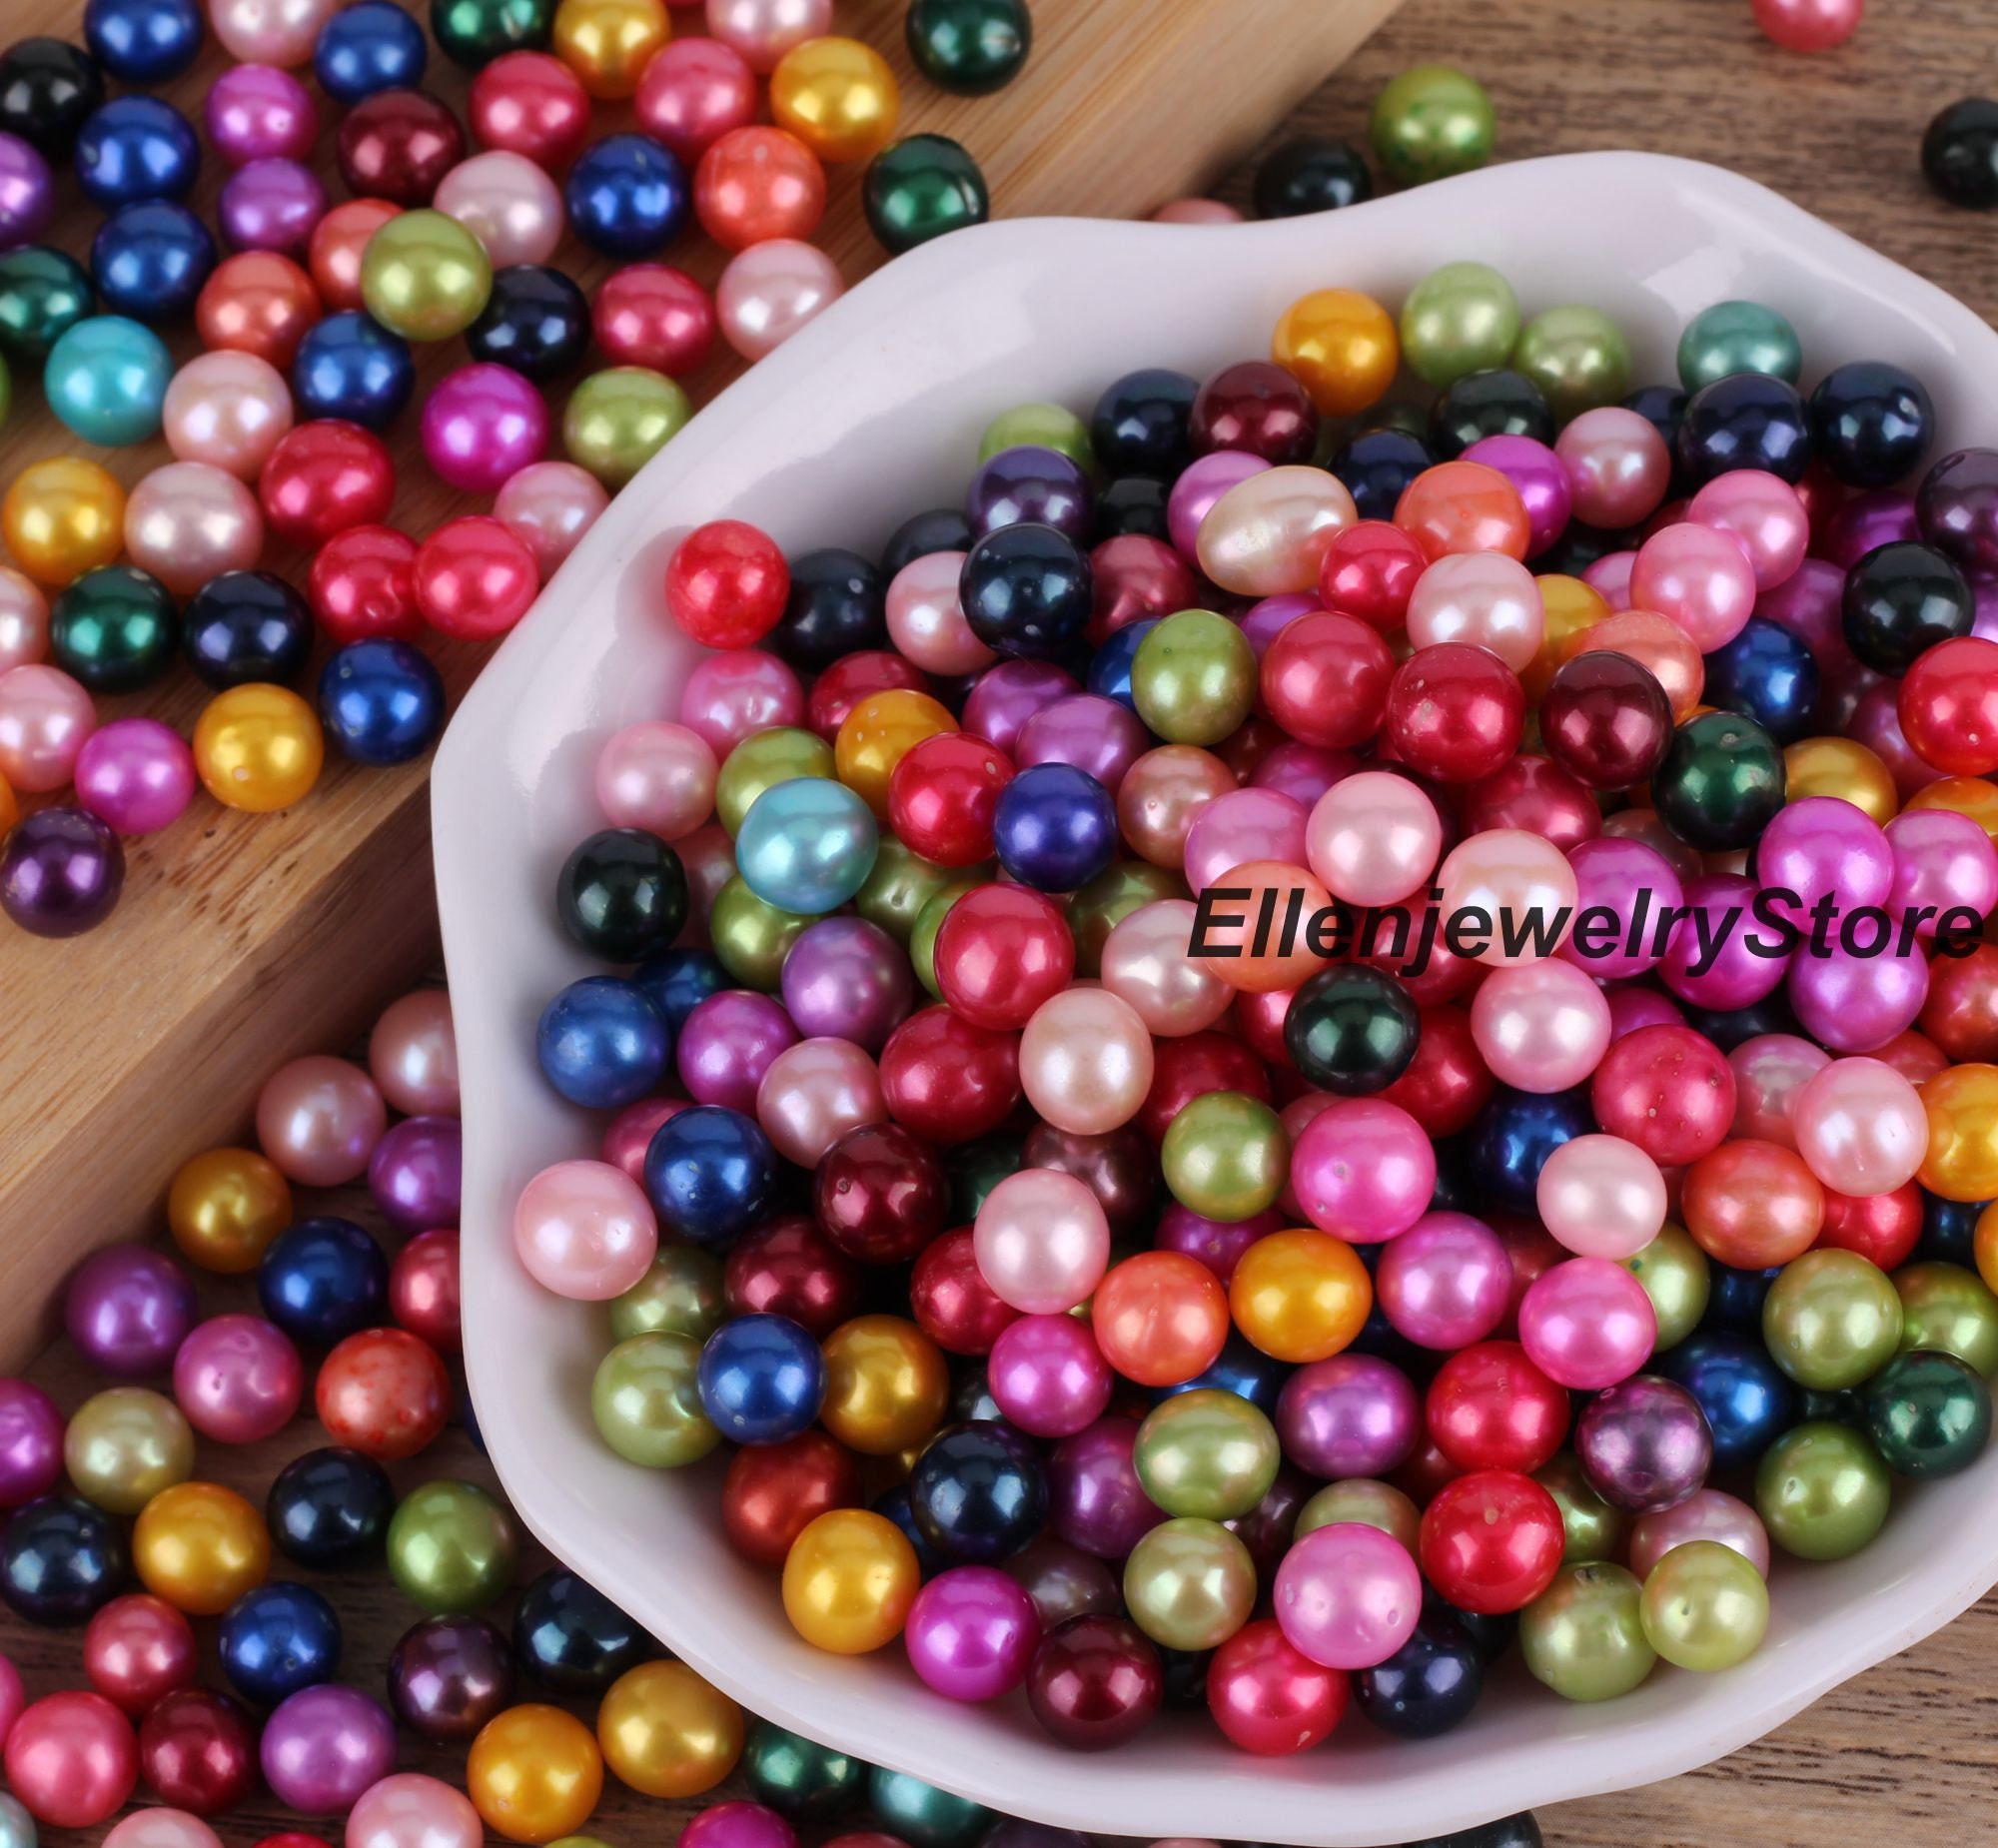 150Pcs/Pack Mix Size 3/4/5/6/8mm Beads With Hole Colorful Pearls Round  Acrylic Imitation Pearl DIY For Jewelry Making Craft